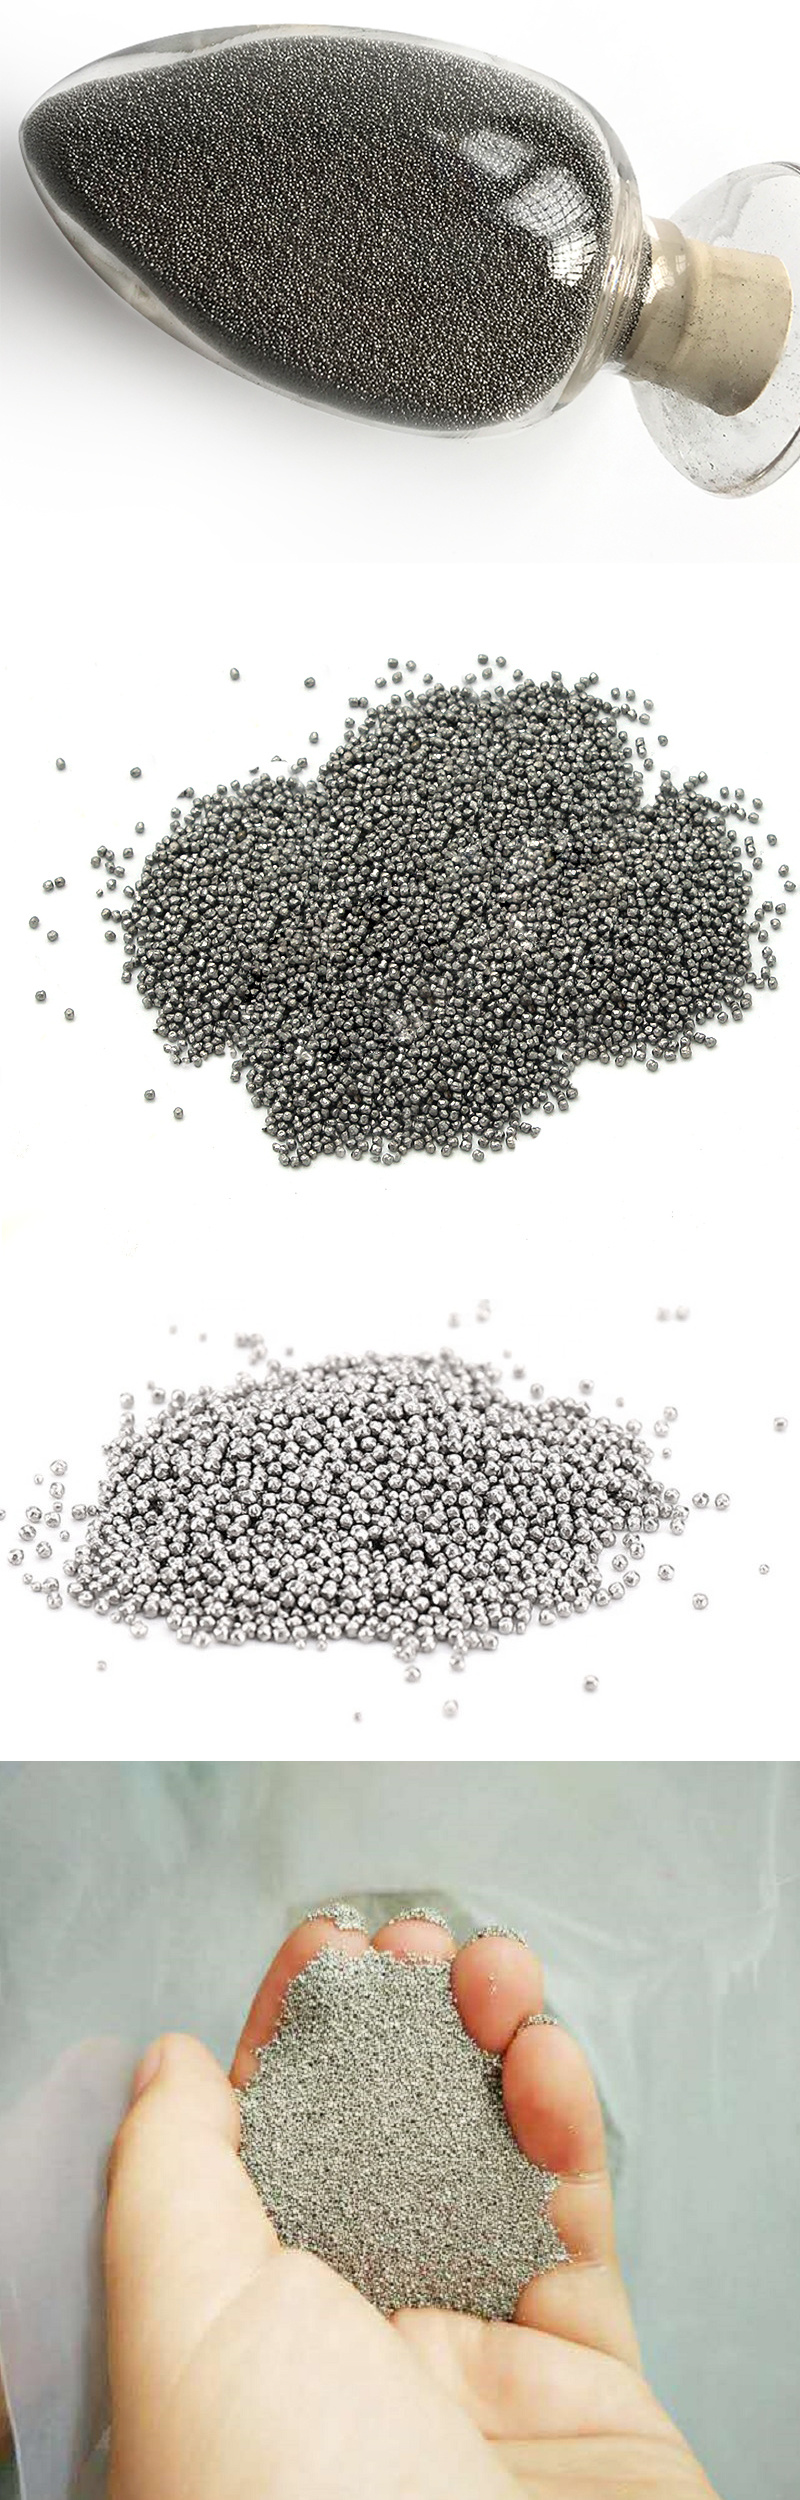 Wholesale S550 Steel Shot 1.7mm for Blasting Cleaning